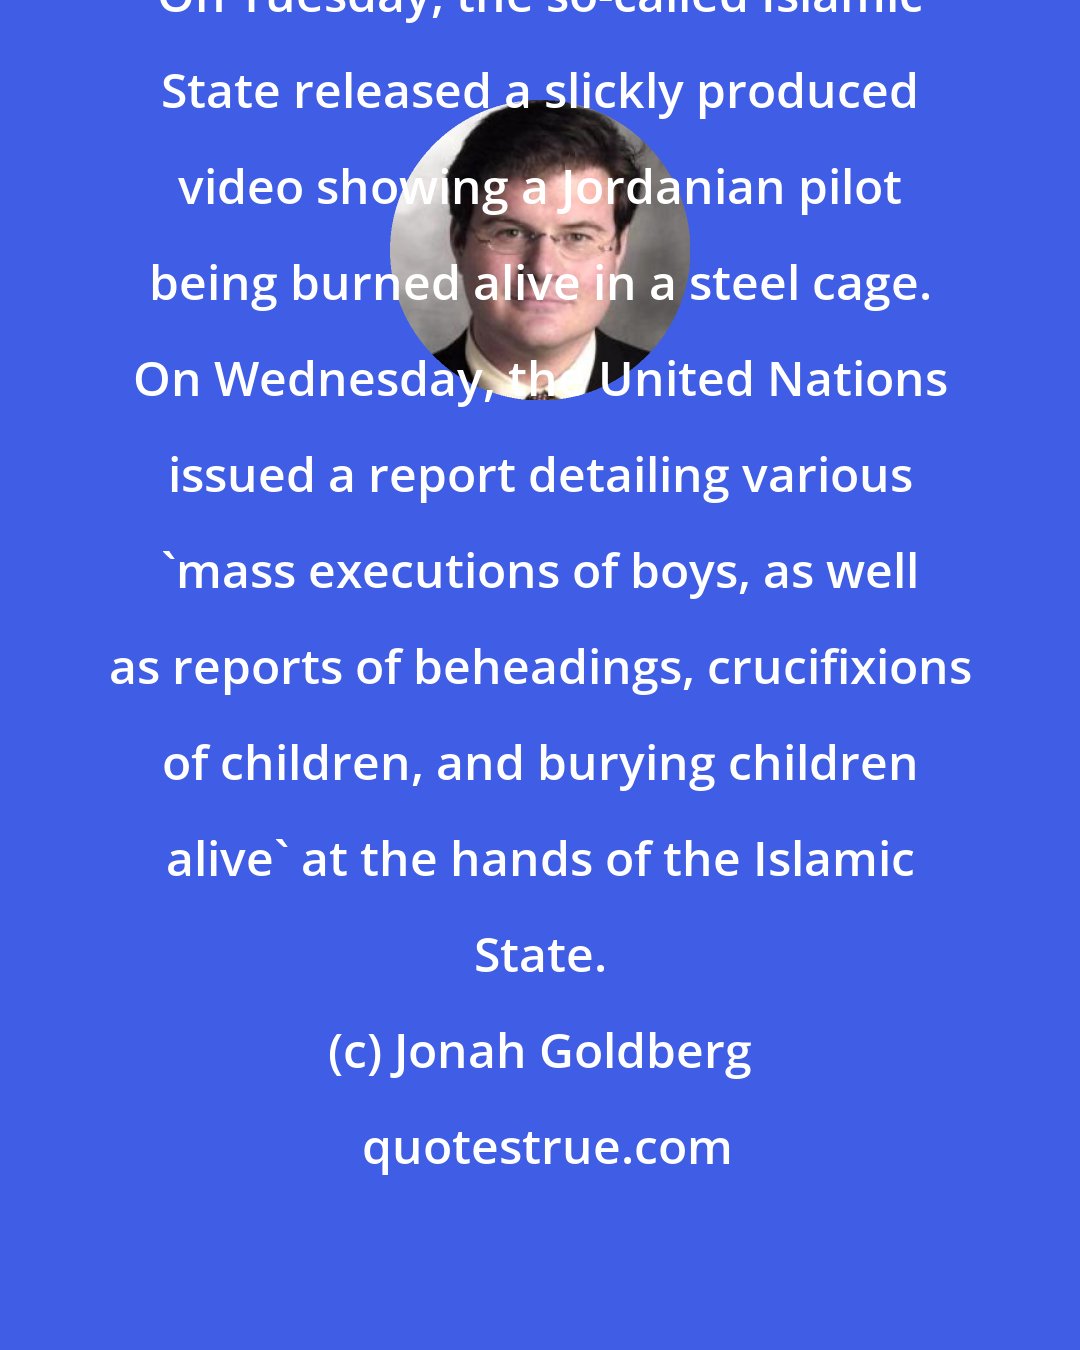 Jonah Goldberg: On Tuesday, the so-called Islamic State released a slickly produced video showing a Jordanian pilot being burned alive in a steel cage. On Wednesday, the United Nations issued a report detailing various 'mass executions of boys, as well as reports of beheadings, crucifixions of children, and burying children alive' at the hands of the Islamic State.